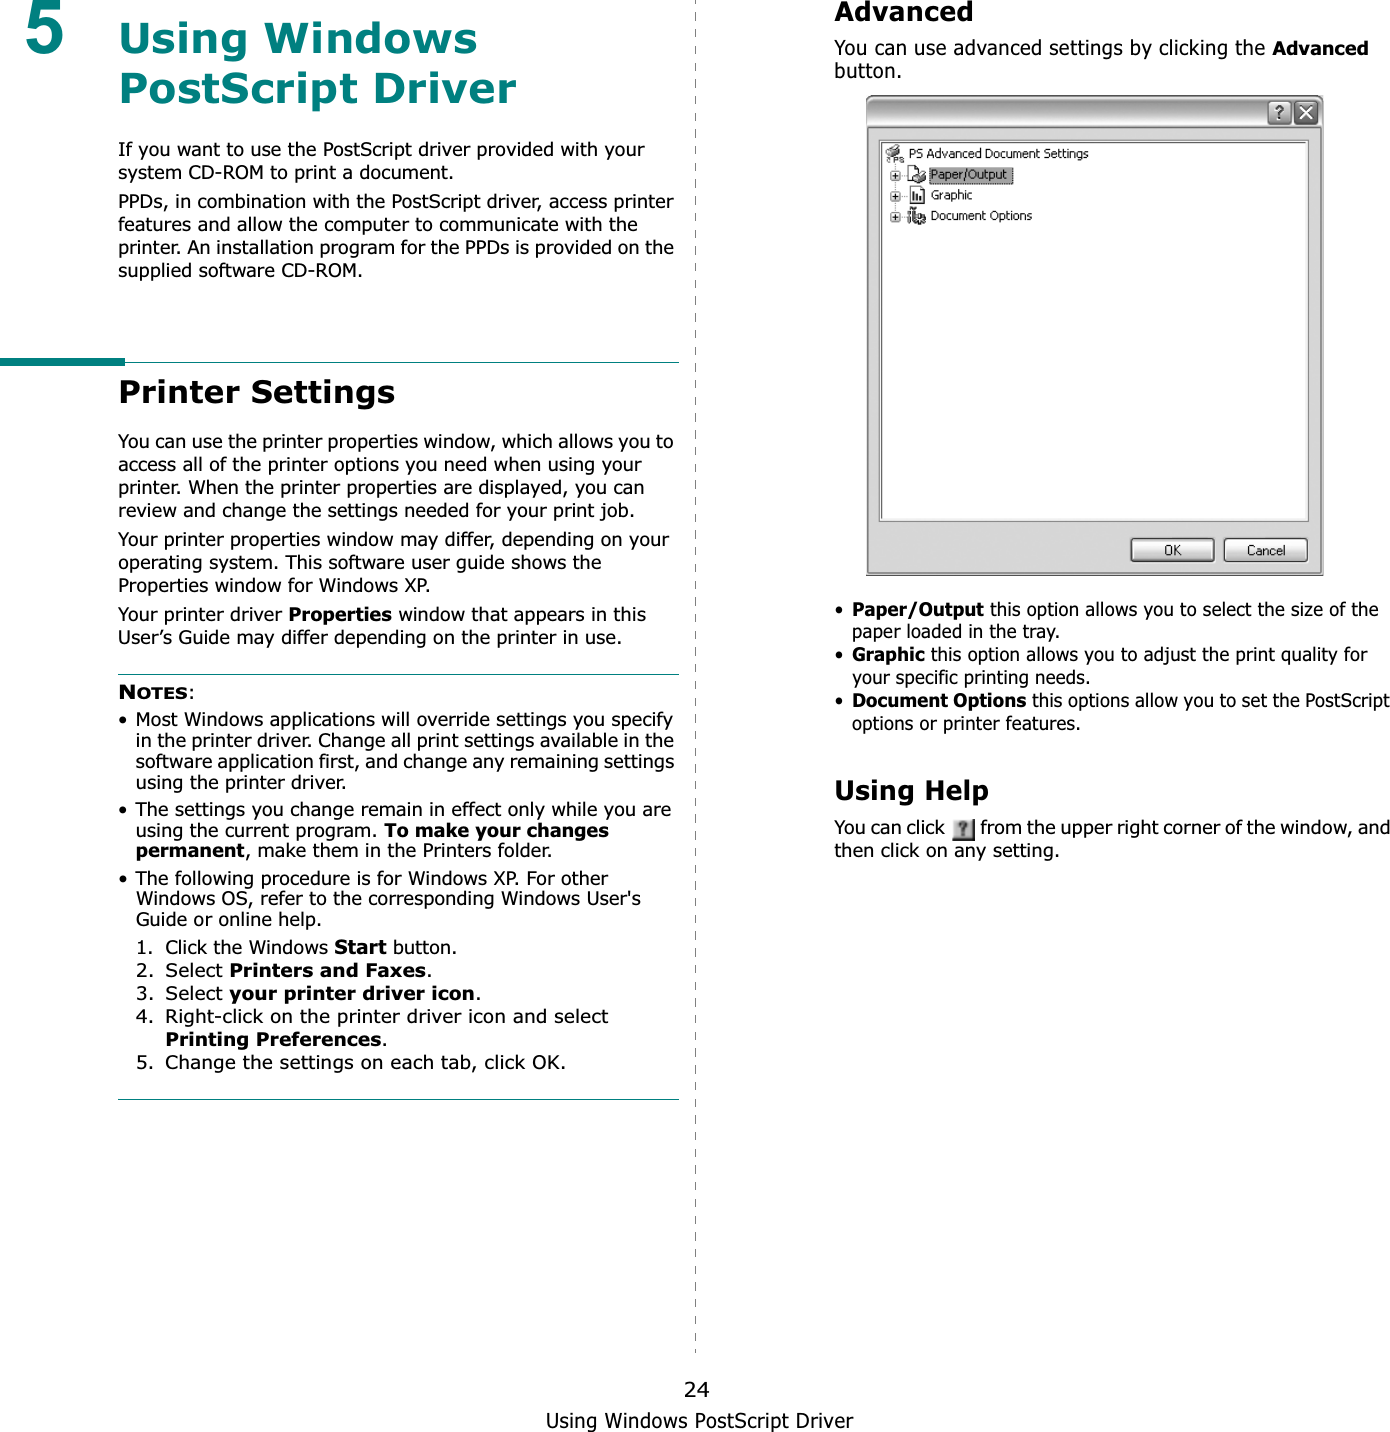 Using Windows PostScript Driver245Using Windows PostScript DriverIf you want to use the PostScript driver provided with your system CD-ROM to print a document.PPDs, in combination with the PostScript driver, access printer features and allow the computer to communicate with the printer. An installation program for the PPDs is provided on the supplied software CD-ROM.Printer SettingsYou can use the printer properties window, which allows you to access all of the printer options you need when using your printer. When the printer properties are displayed, you can review and change the settings needed for your print job. Your printer properties window may differ, depending on your operating system. This software user guide shows the Properties window for Windows XP.Your printer driver Properties window that appears in this User’s Guide may differ depending on the printer in use.NOTES:• Most Windows applications will override settings you specify in the printer driver. Change all print settings available in the software application first, and change any remaining settings using the printer driver. • The settings you change remain in effect only while you are using the current program. To make your changes permanent, make them in the Printers folder. • The following procedure is for Windows XP. For other Windows OS, refer to the corresponding Windows User&apos;s Guide or online help.1. Click the Windows Start button.2. Select Printers and Faxes.3. Select your printer driver icon.4. Right-click on the printer driver icon and select Printing Preferences.5. Change the settings on each tab, click OK.AdvancedYou can use advanced settings by clicking the Advancedbutton.•Paper/Output this option allows you to select the size of the paper loaded in the tray.•Graphicthis option allows you to adjust the print quality for your specific printing needs.•Document Optionsthis options allow you to set the PostScript options or printer features.Using HelpYou can click   from the upper right corner of the window, and then click on any setting. 